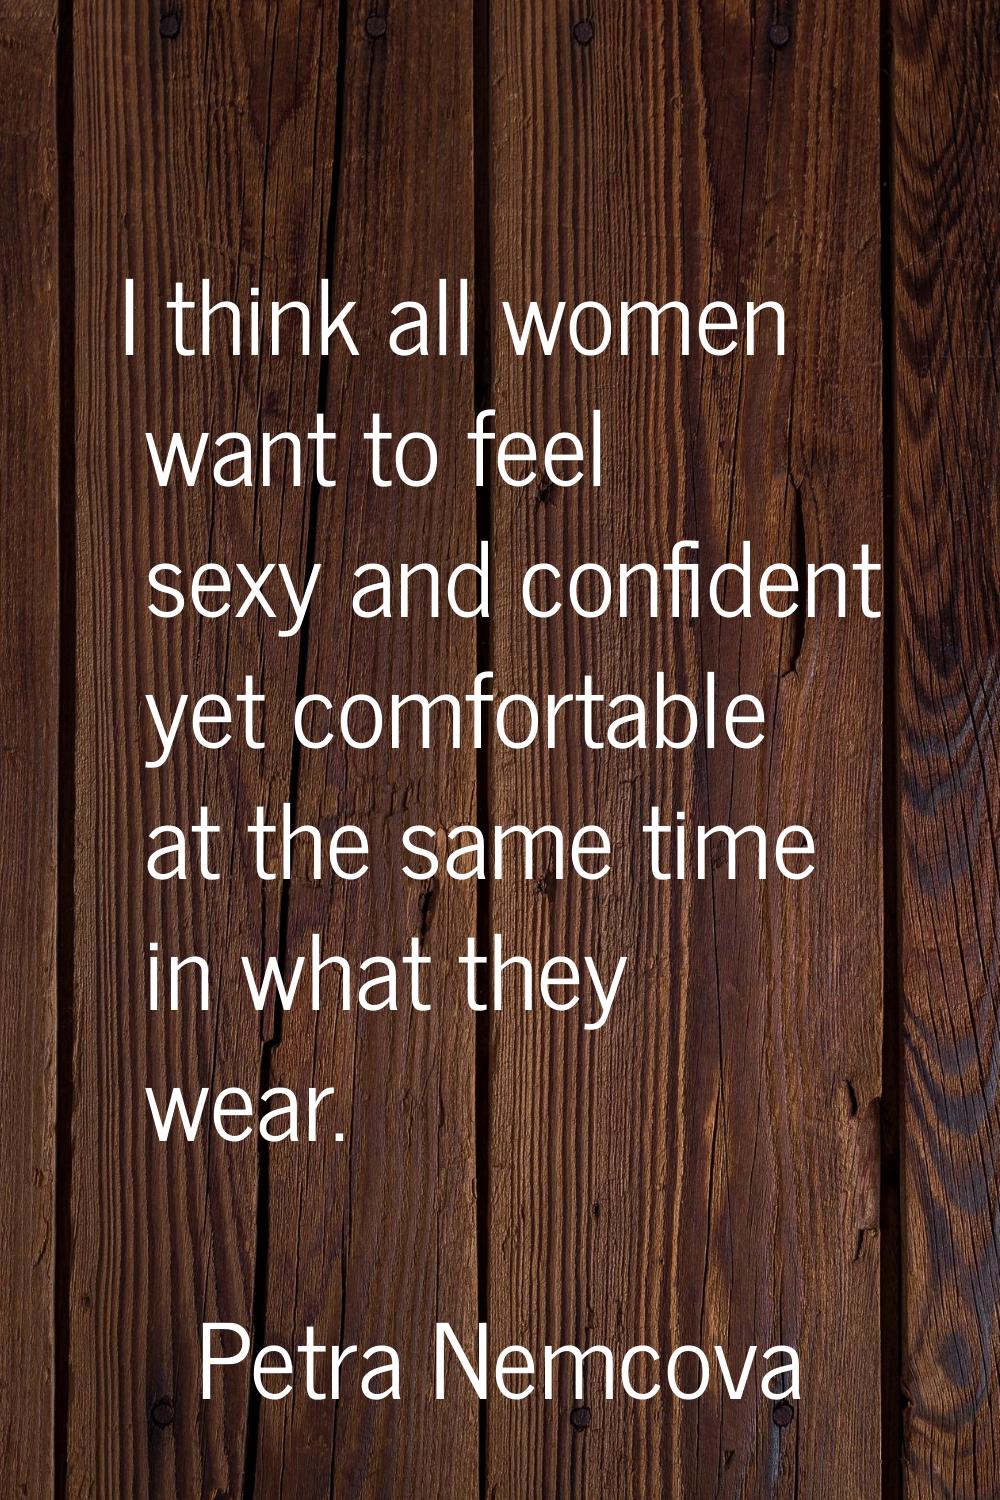 I think all women want to feel sexy and confident yet comfortable at the same time in what they wea